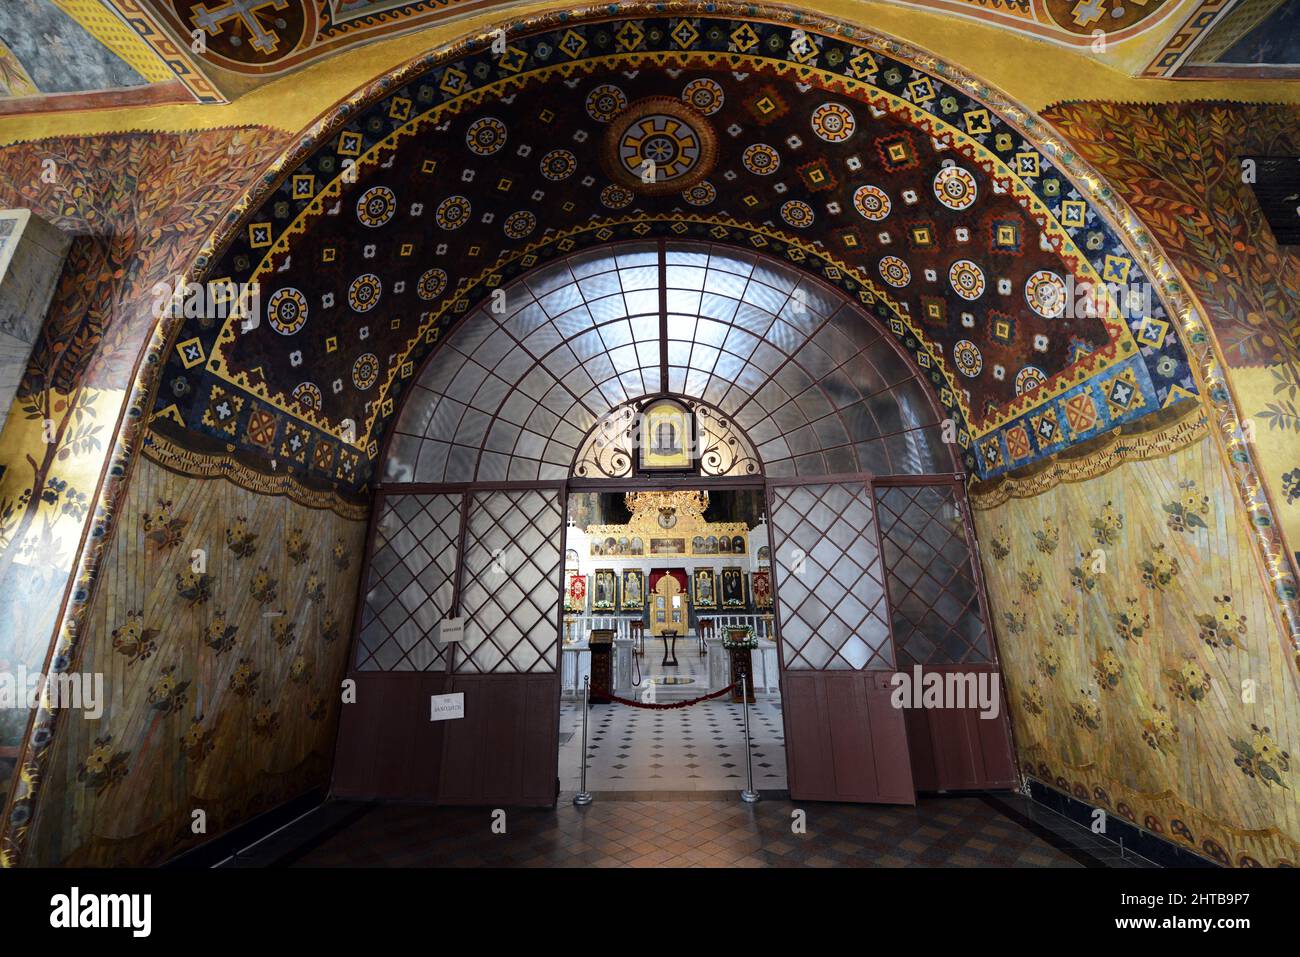 Interior of the Trapezna (Refectory) Church of Anthony and Theodosius of Ukrainian Orthodox Church at the Lavra monstery complex in Kyiv, Ukraine. Stock Photo